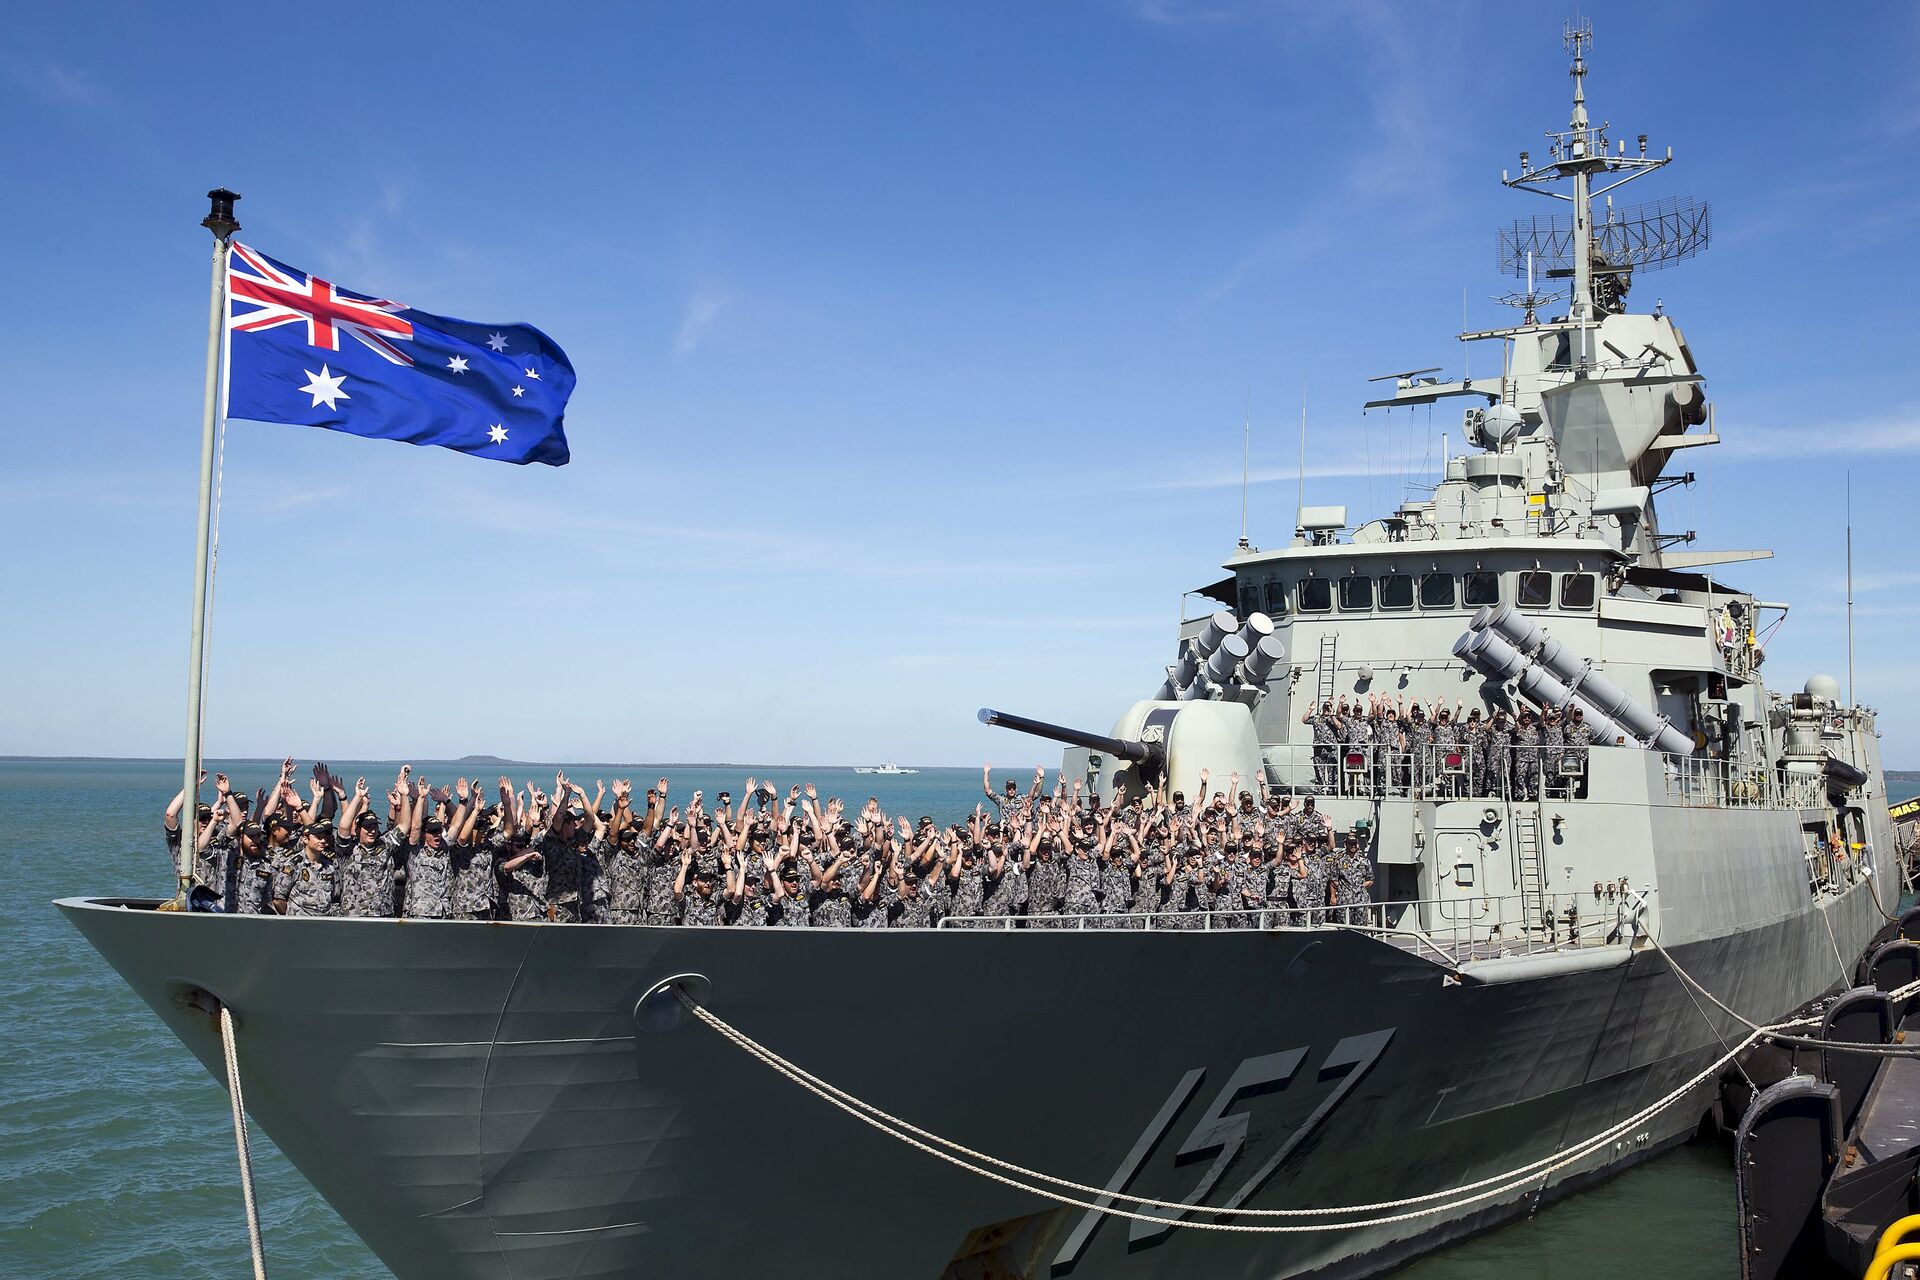 The crew of the Royal Australian Navy Anzac class frigate HMAS Perth cheer as they arrive at the Northern Australian city of Darwin in this picture taken on July 3, 2015 - Sputnik International, 1920, 21.01.2022